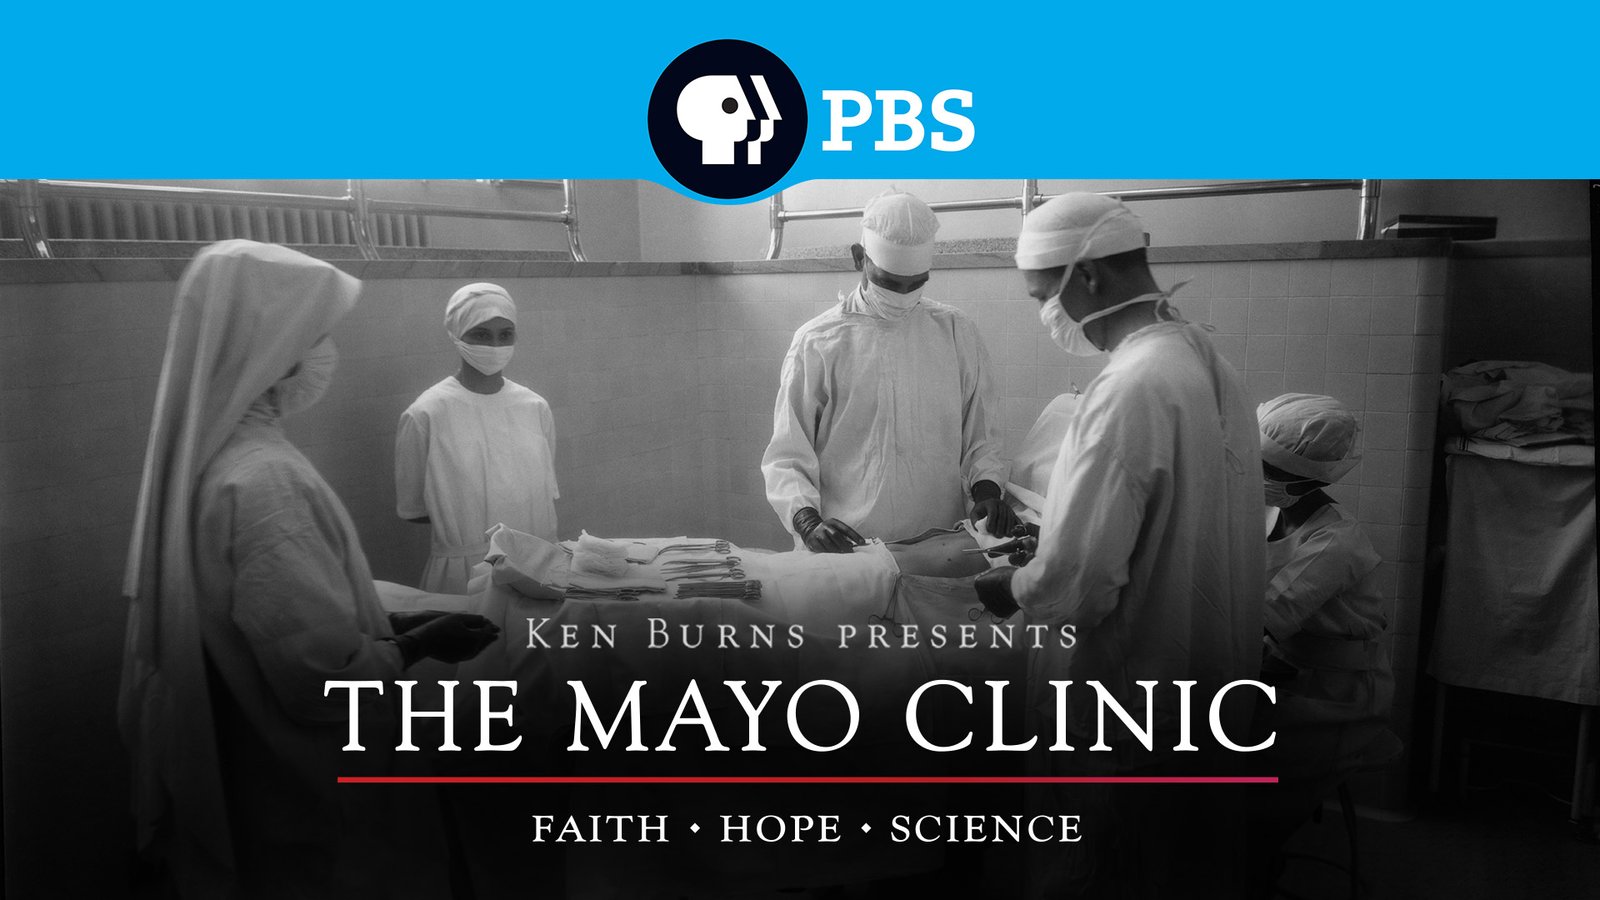 Ken Burns: The Mayo Clinic - Faith, Hope and Science